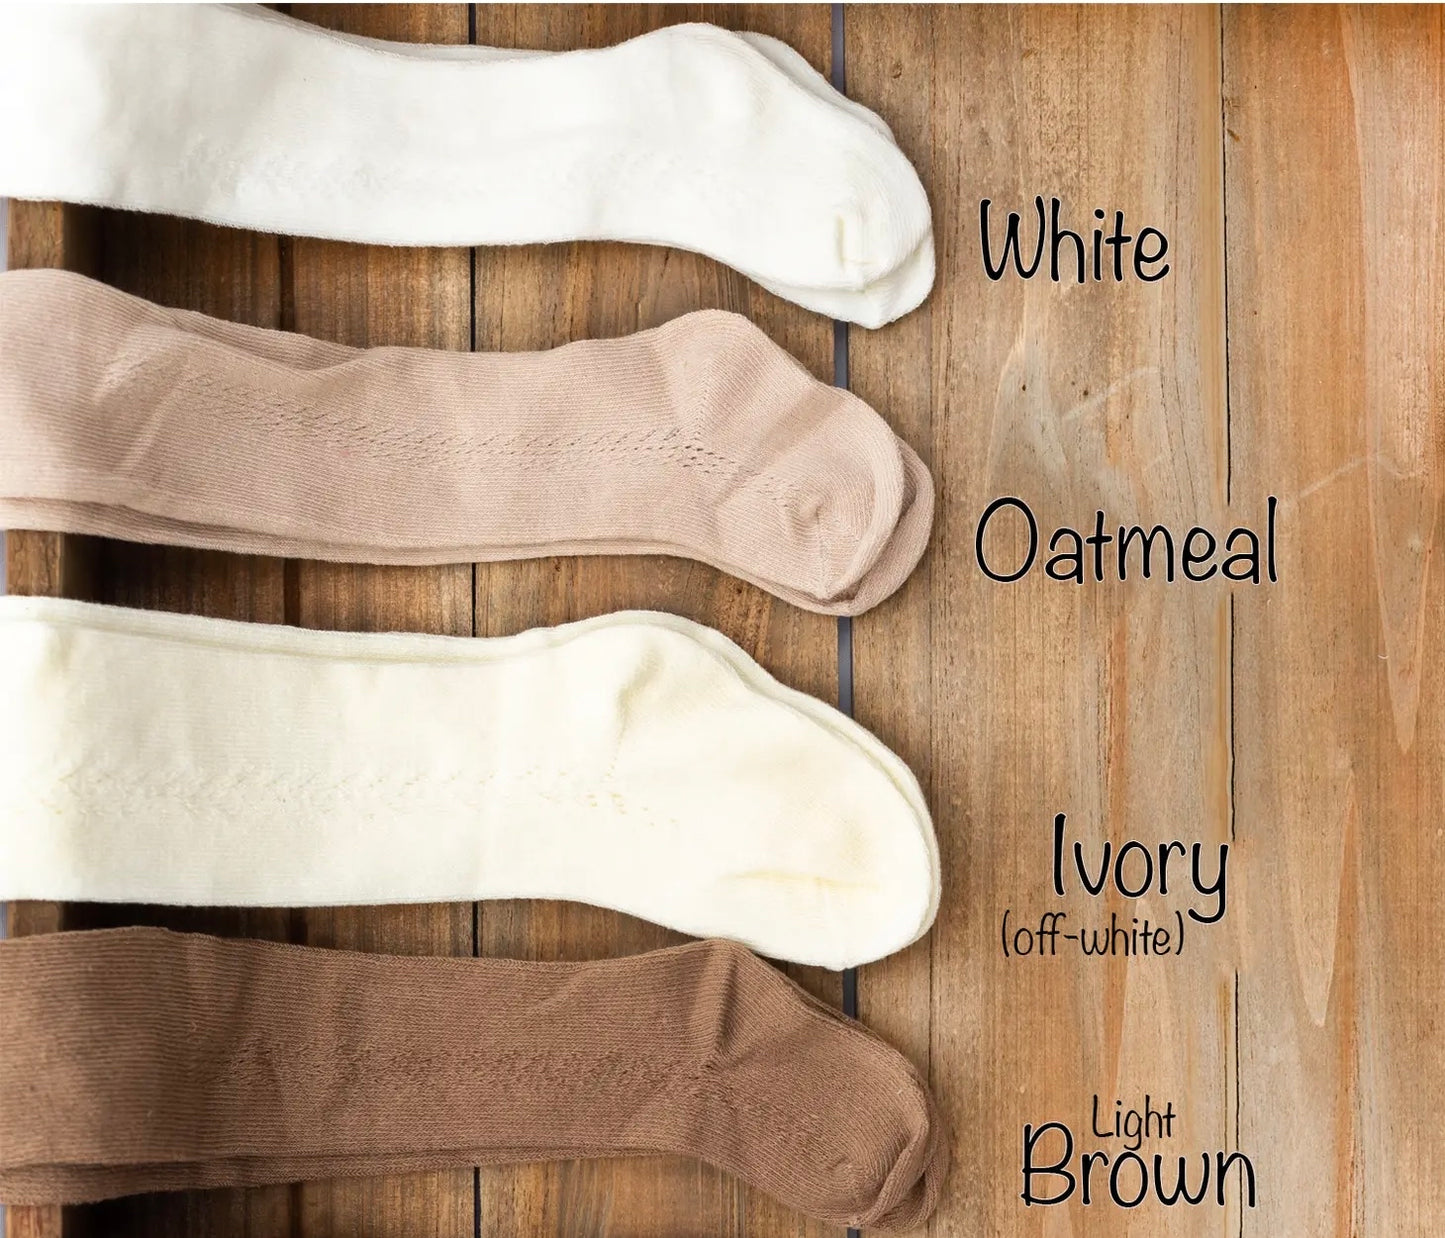 Ivory Cotton Knit Stocking Tights